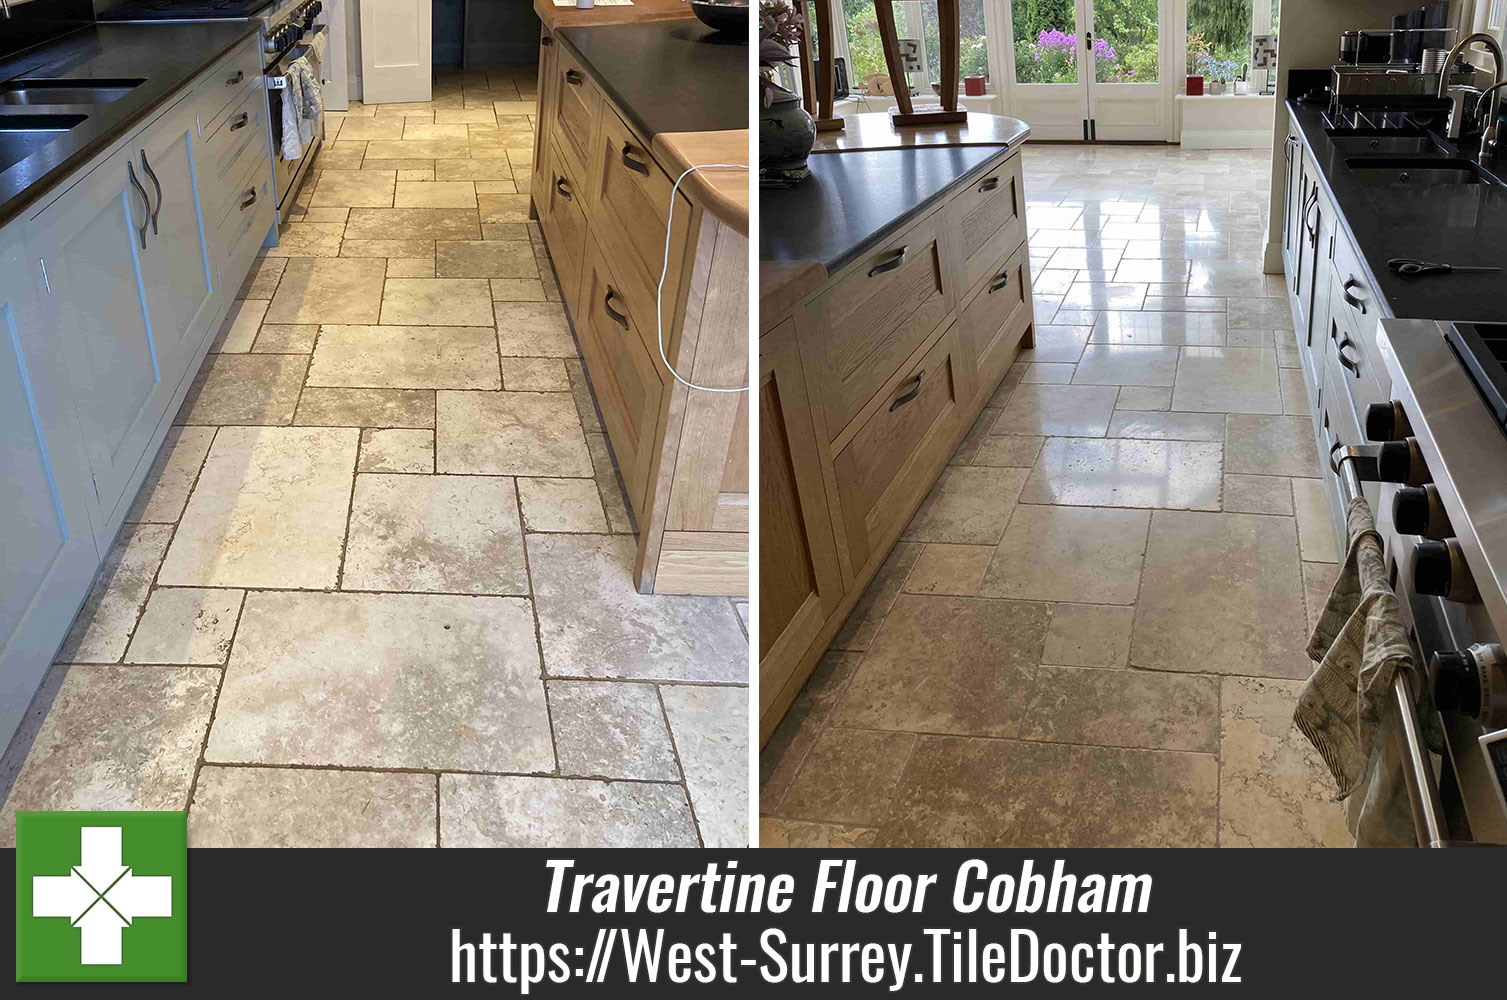 Sealing Travertine Floor Tiles with Tile Doctor Ultra-Seal to achieve a Natural Look in Cobham